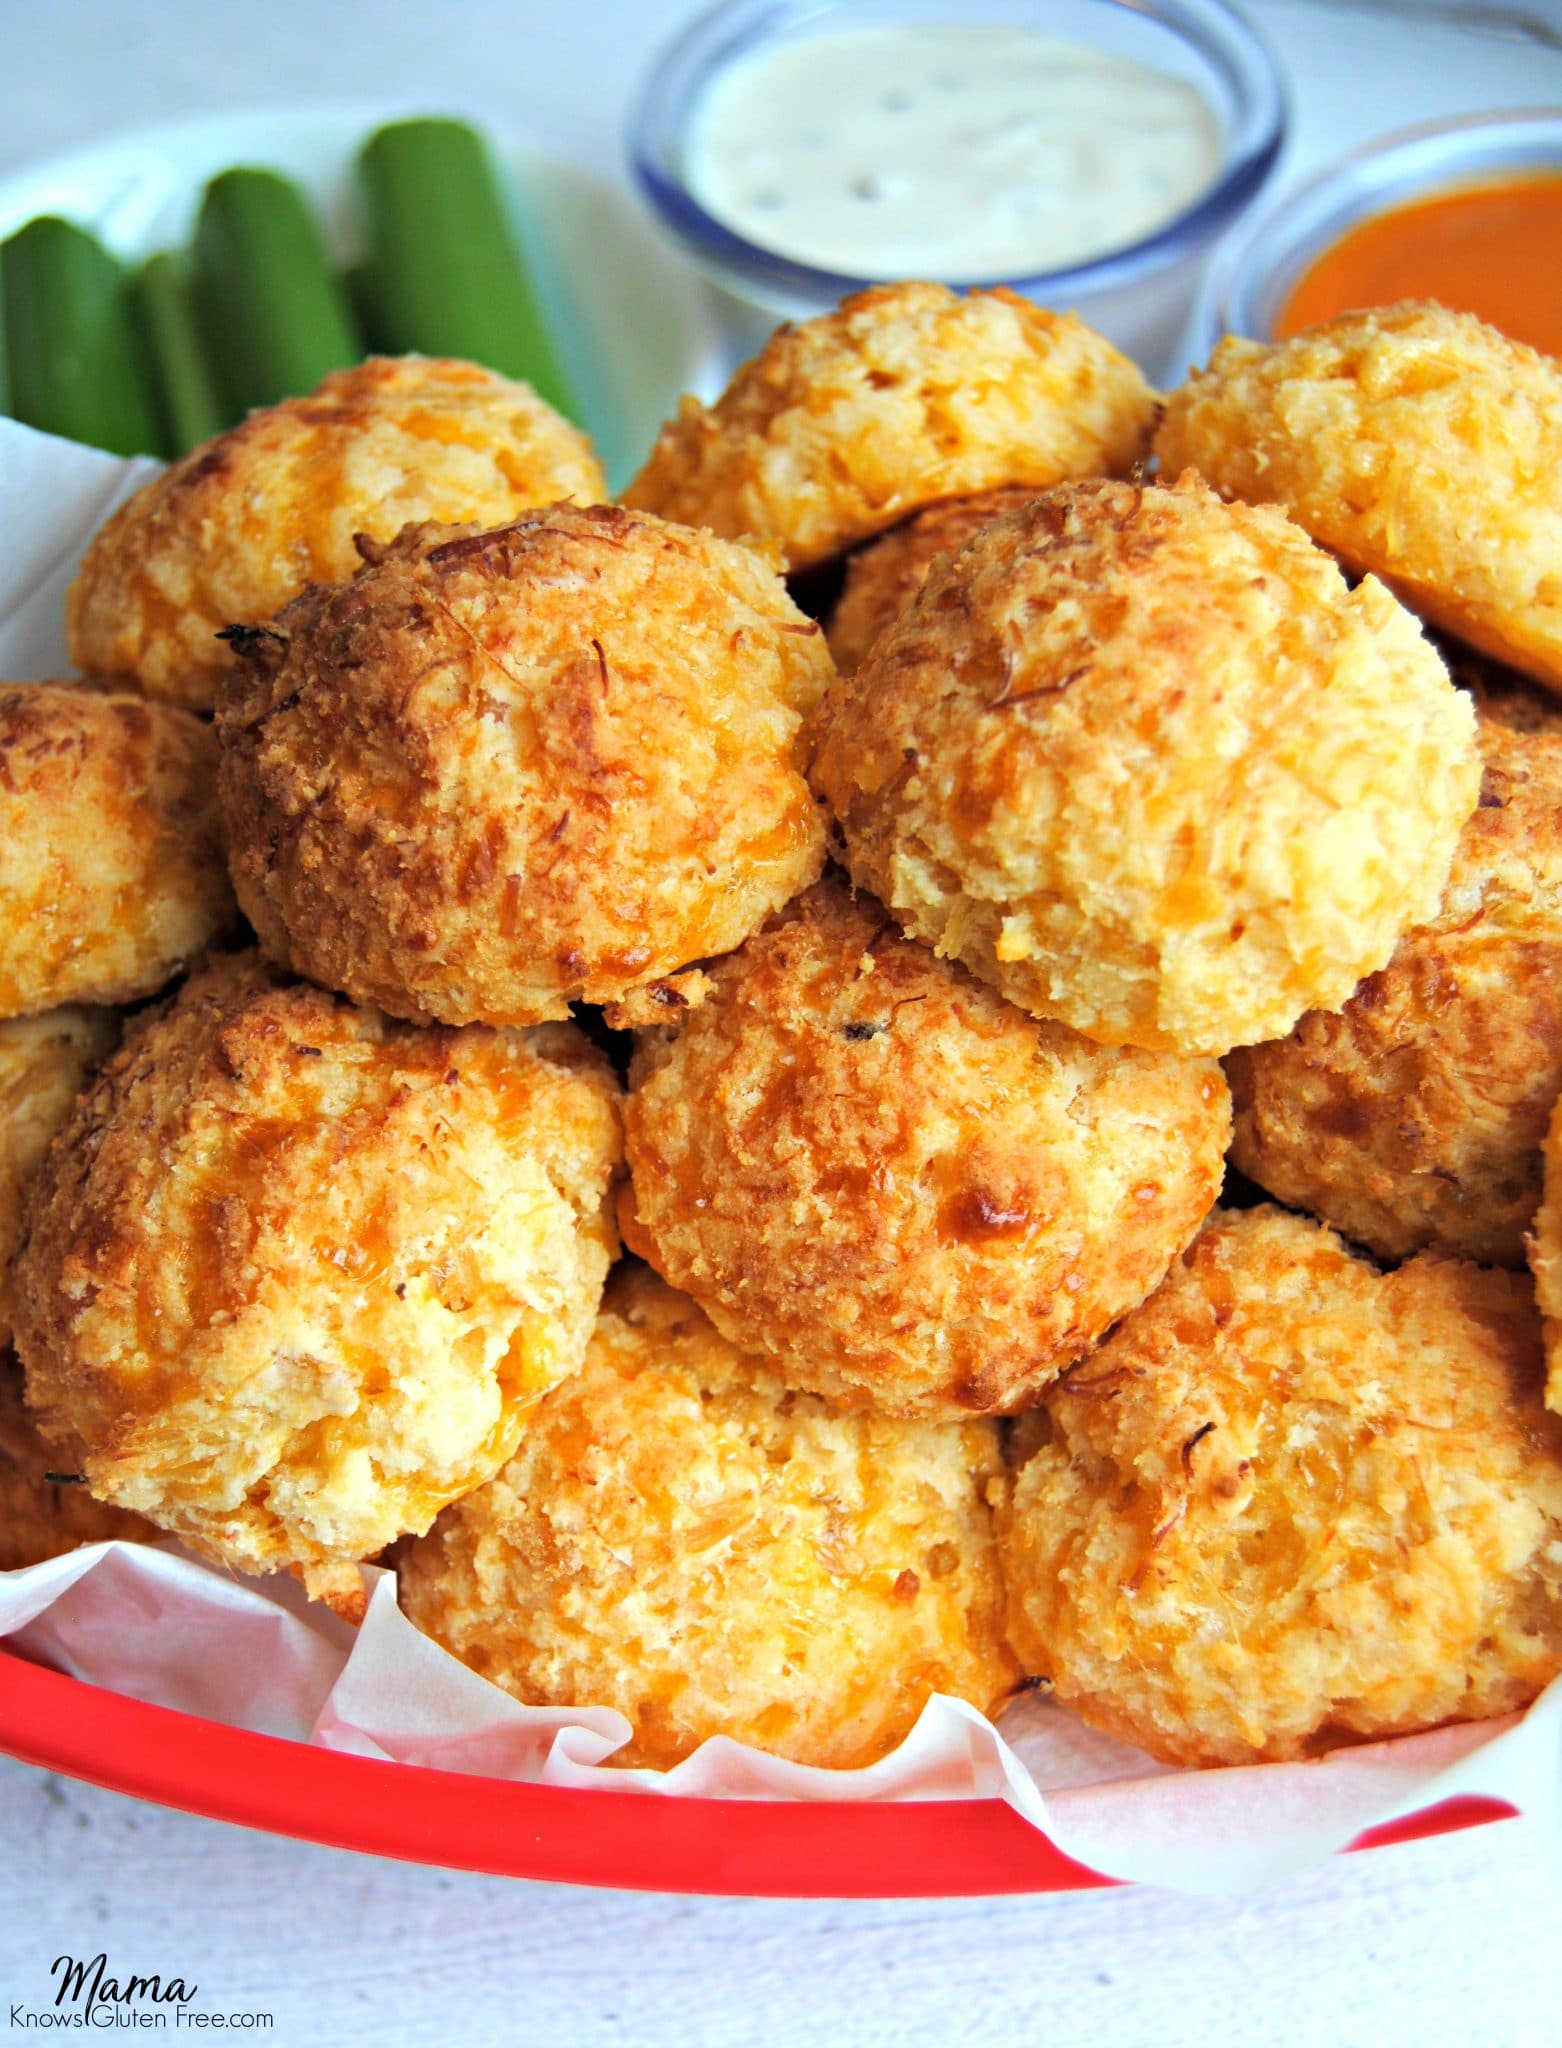 gluten-free buffalo chicken bites in a red basket with celery and sauce